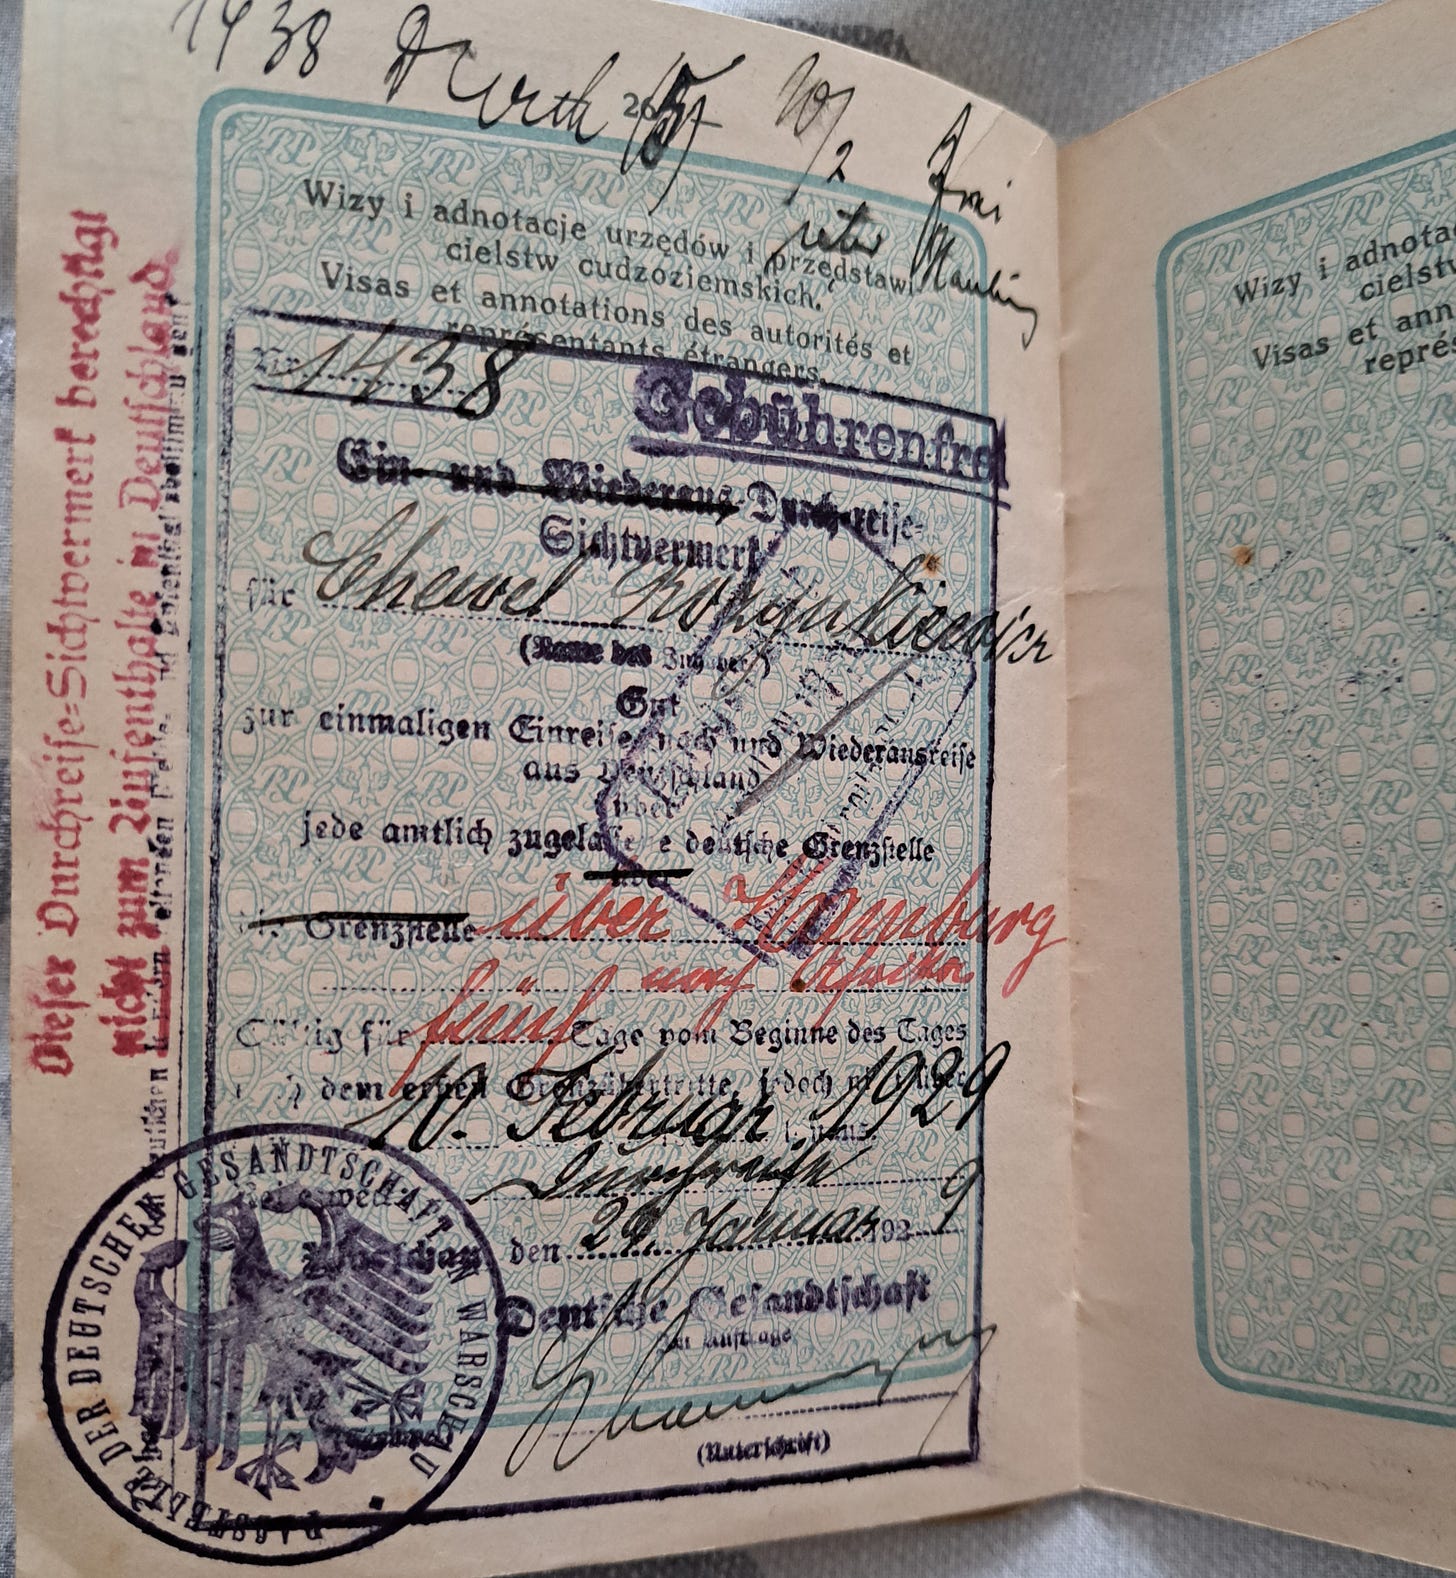 My grandfather's passport with German stamp